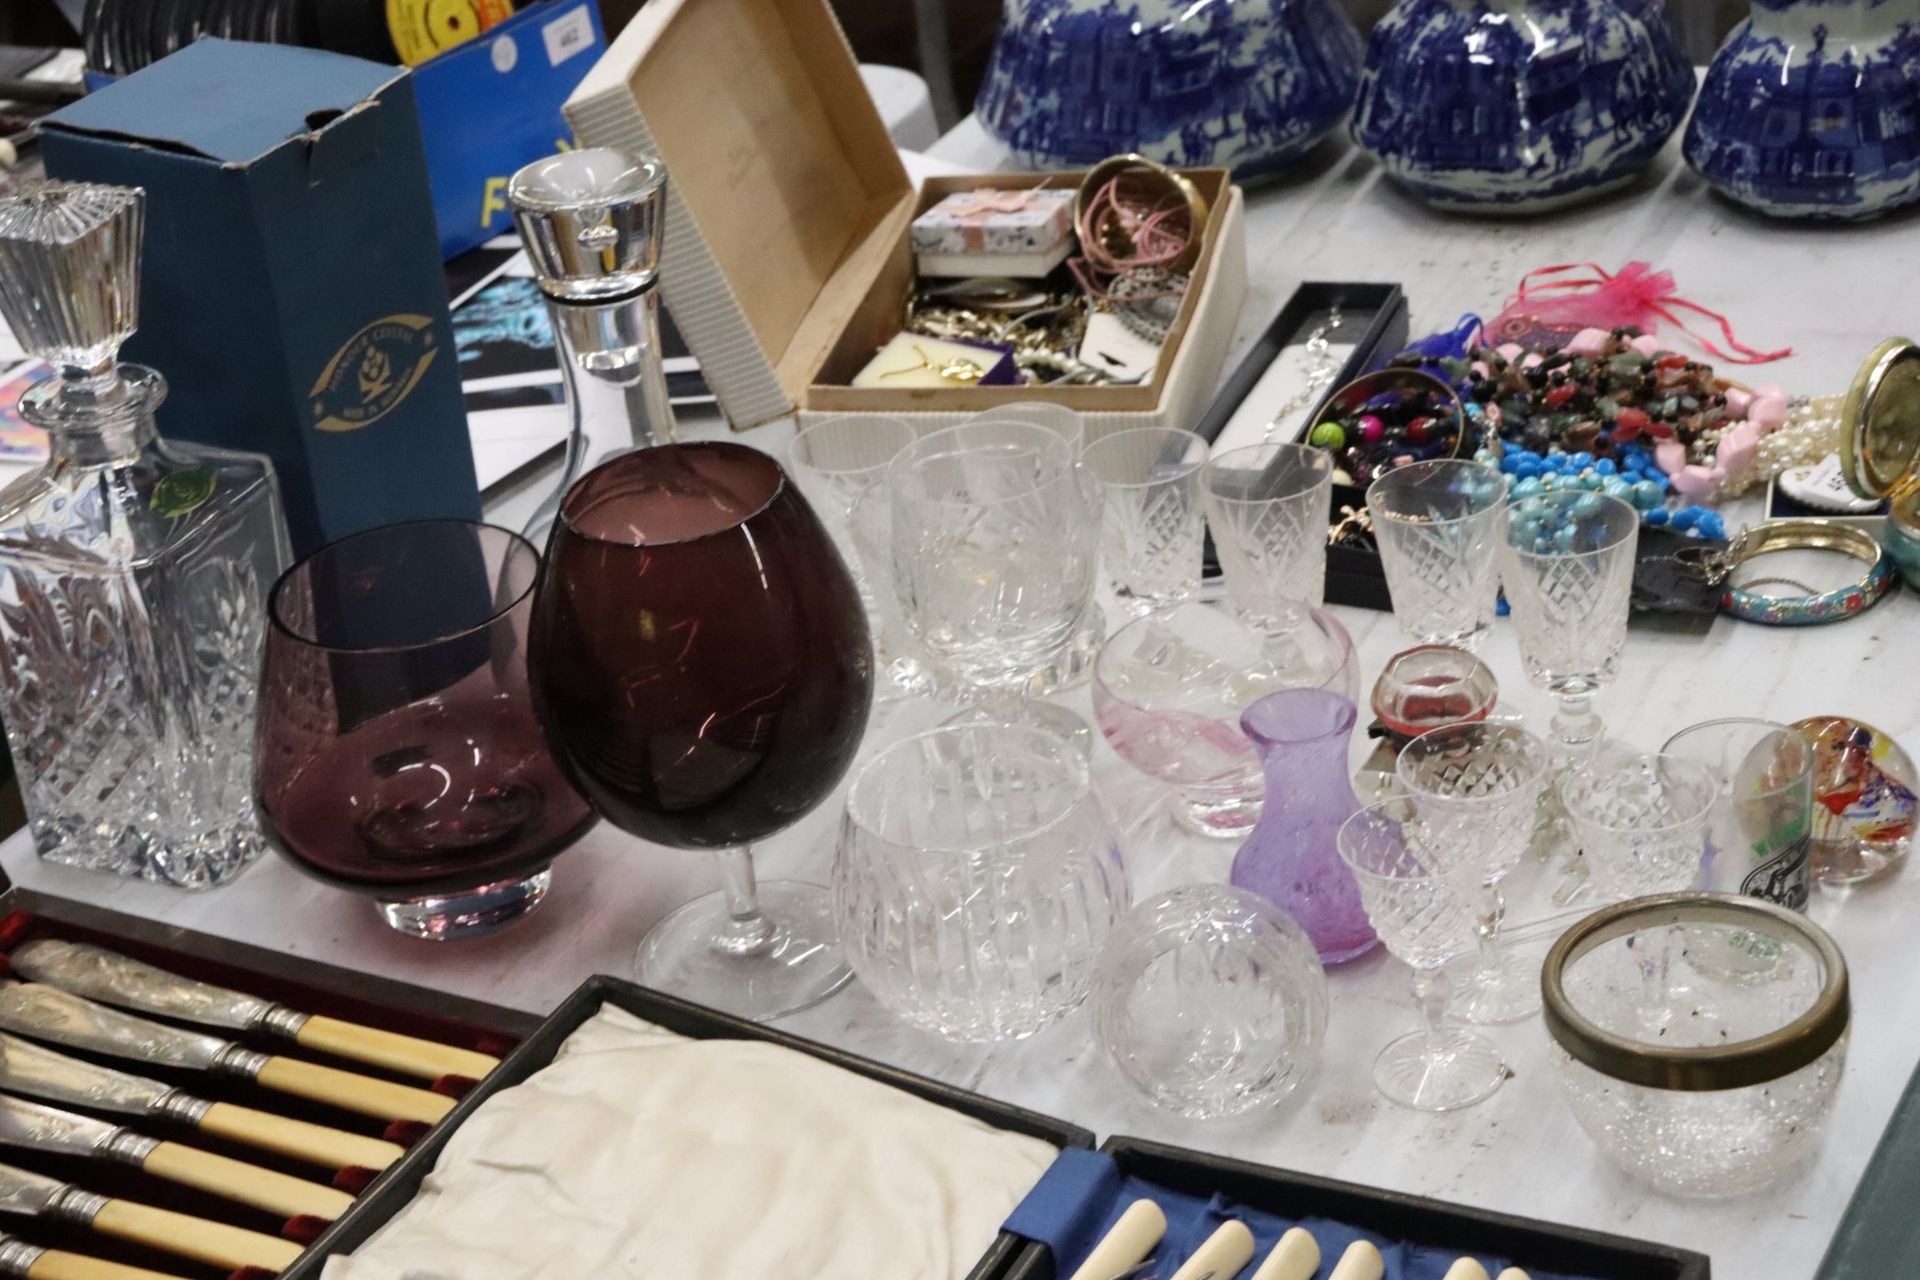 A QUANTITY OF GLASSWARE TO INCLUDE DECANTERS, GLASSES, BOWLS, A SCENT BOTTLE, PAPERWEIGHT, ETC - Image 2 of 10